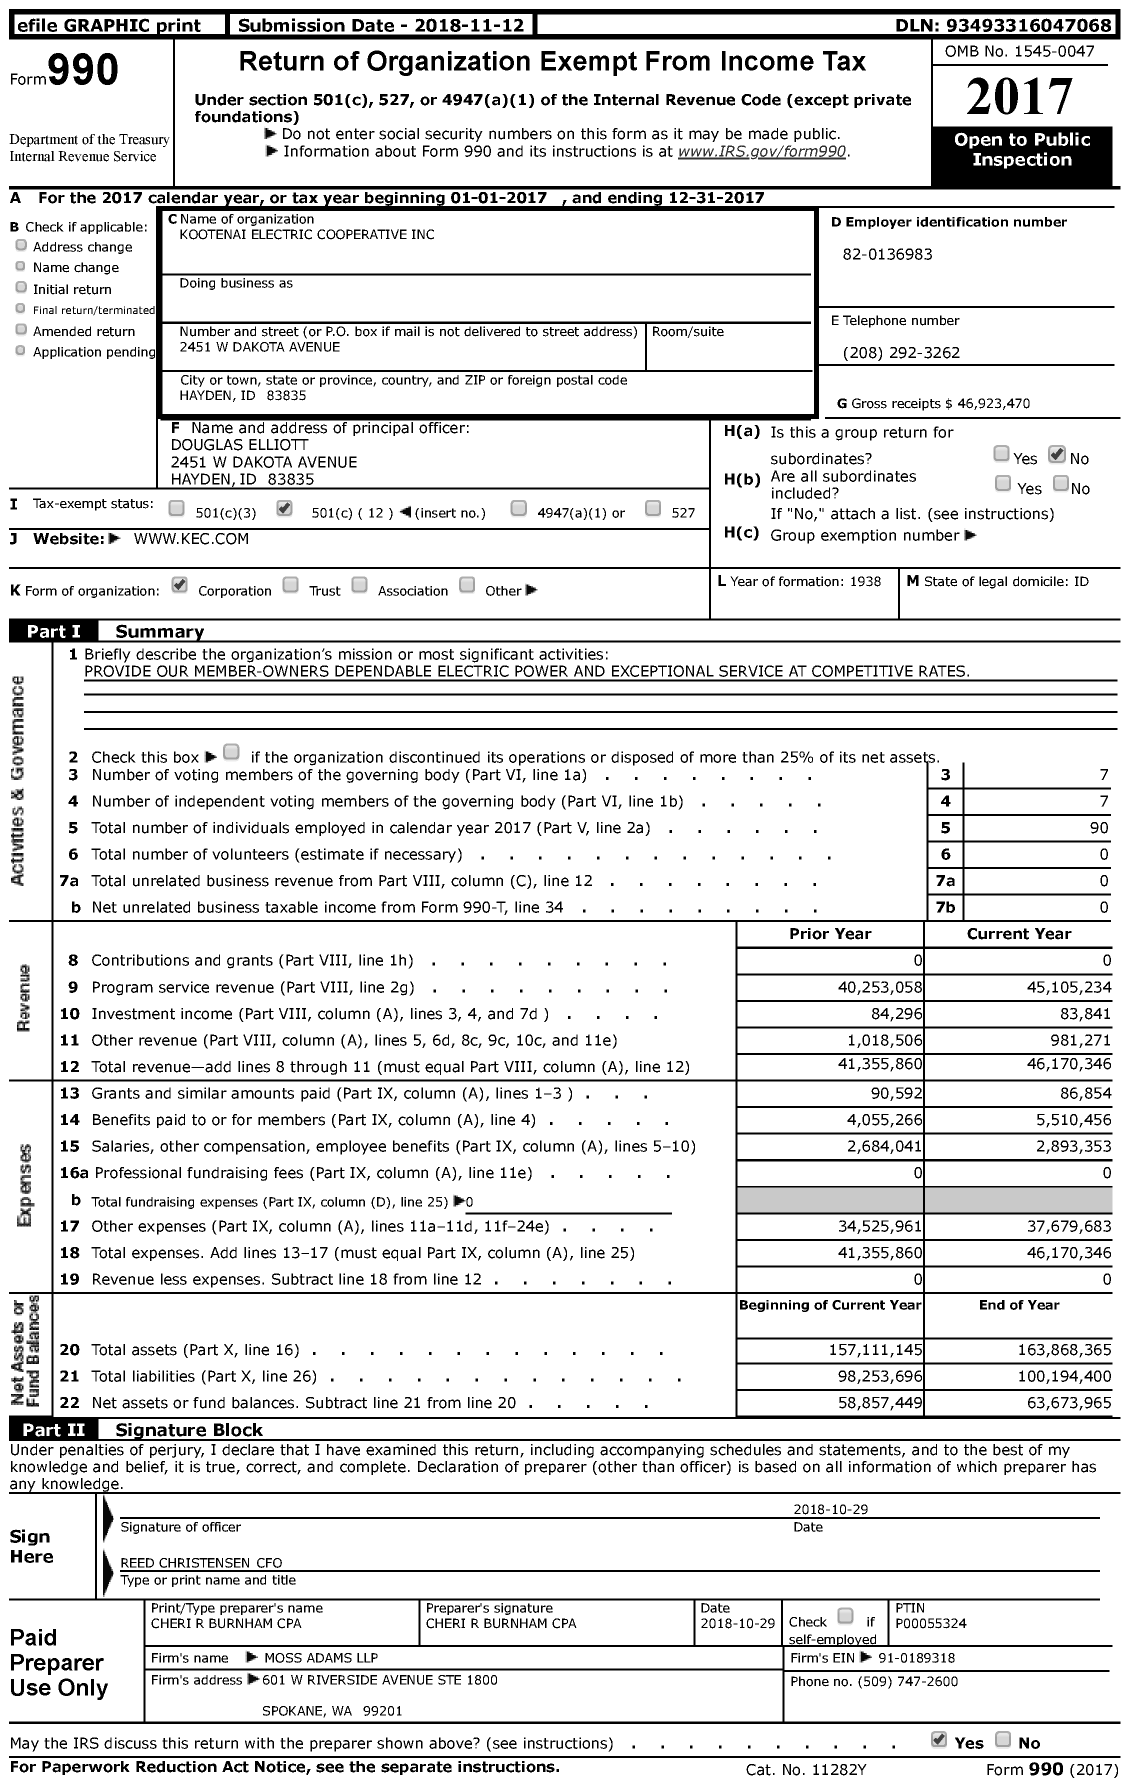 Image of first page of 2017 Form 990 for Kootenai Electric Cooperative (KEC)